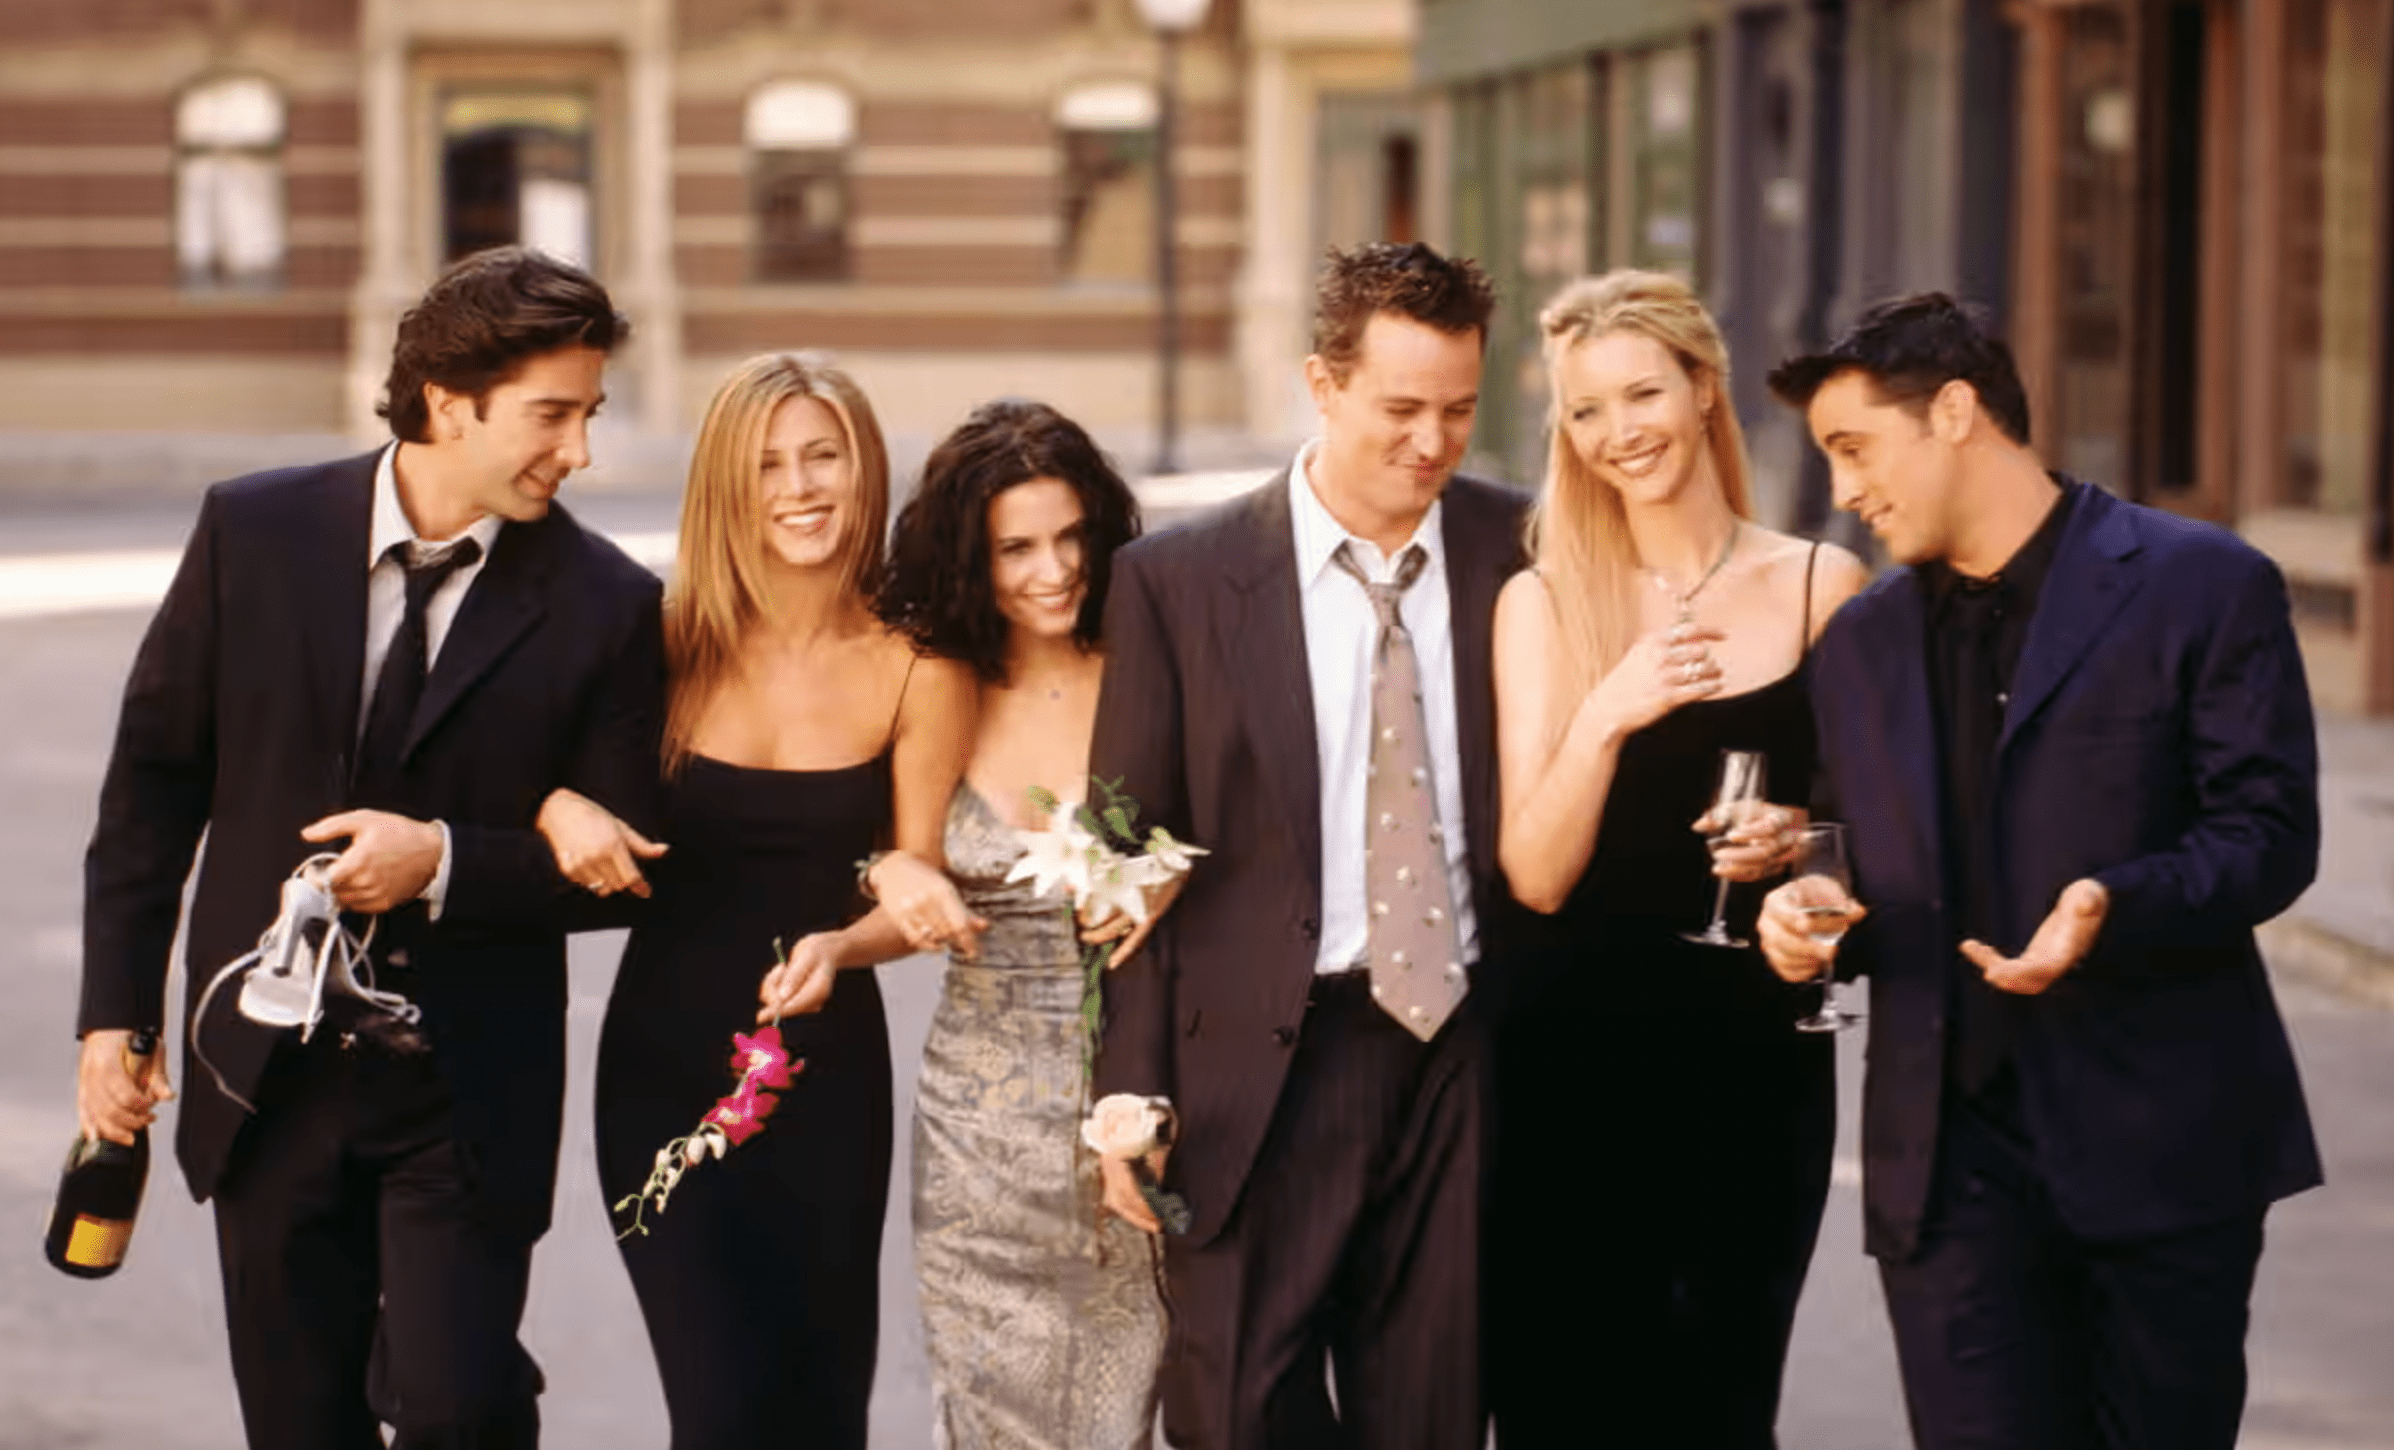 Tribute for Matthew Perry: A Beloved Actor and Comedic Genius